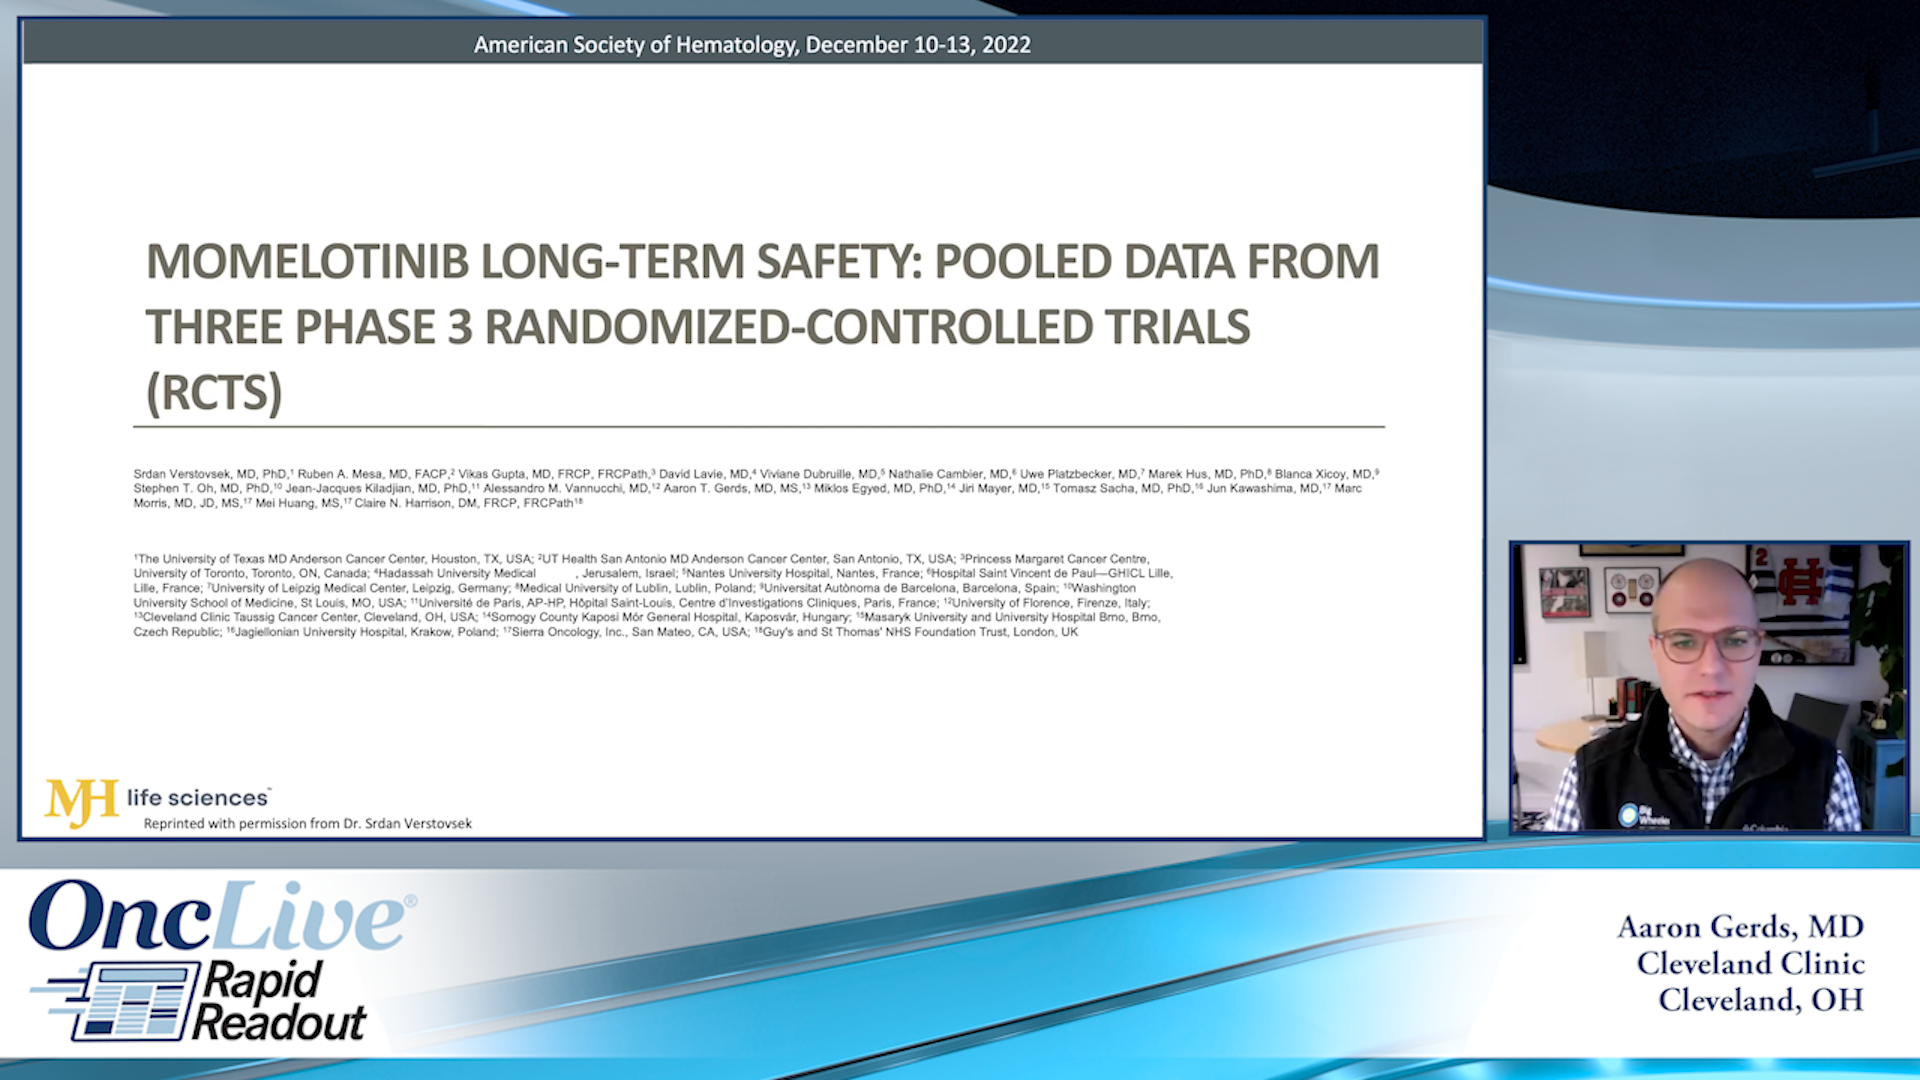 Momelotinib Long-Term Safety: Pooled Data from Three Phase 3 Randomized-Controlled Trials (RCTs)